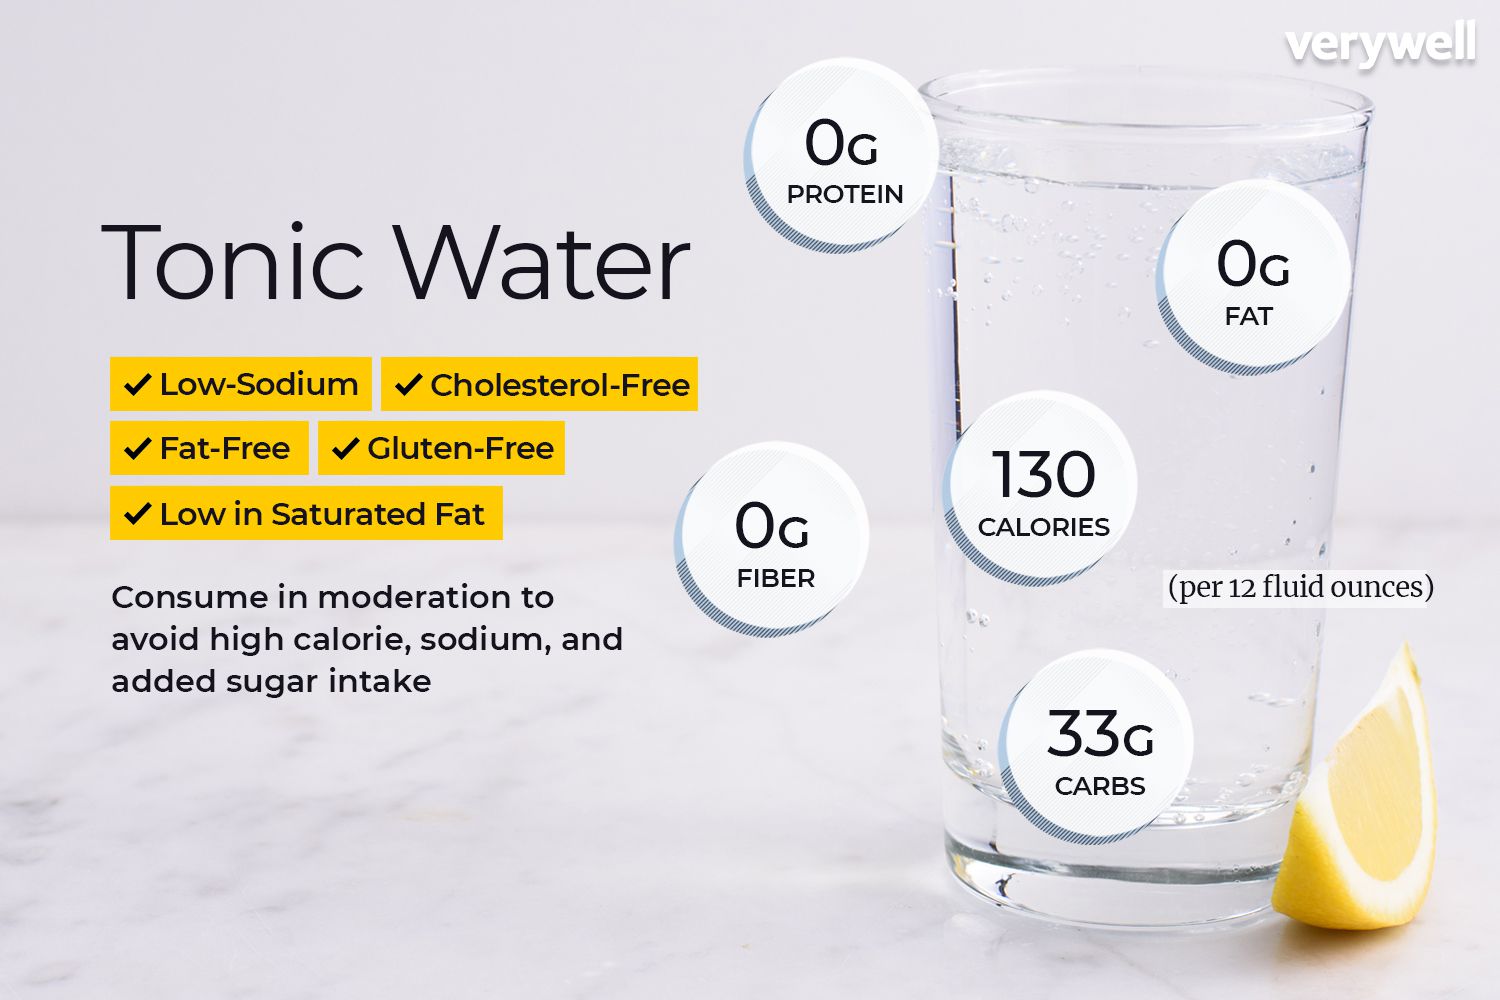 tonic water nutrition facts and health benefits